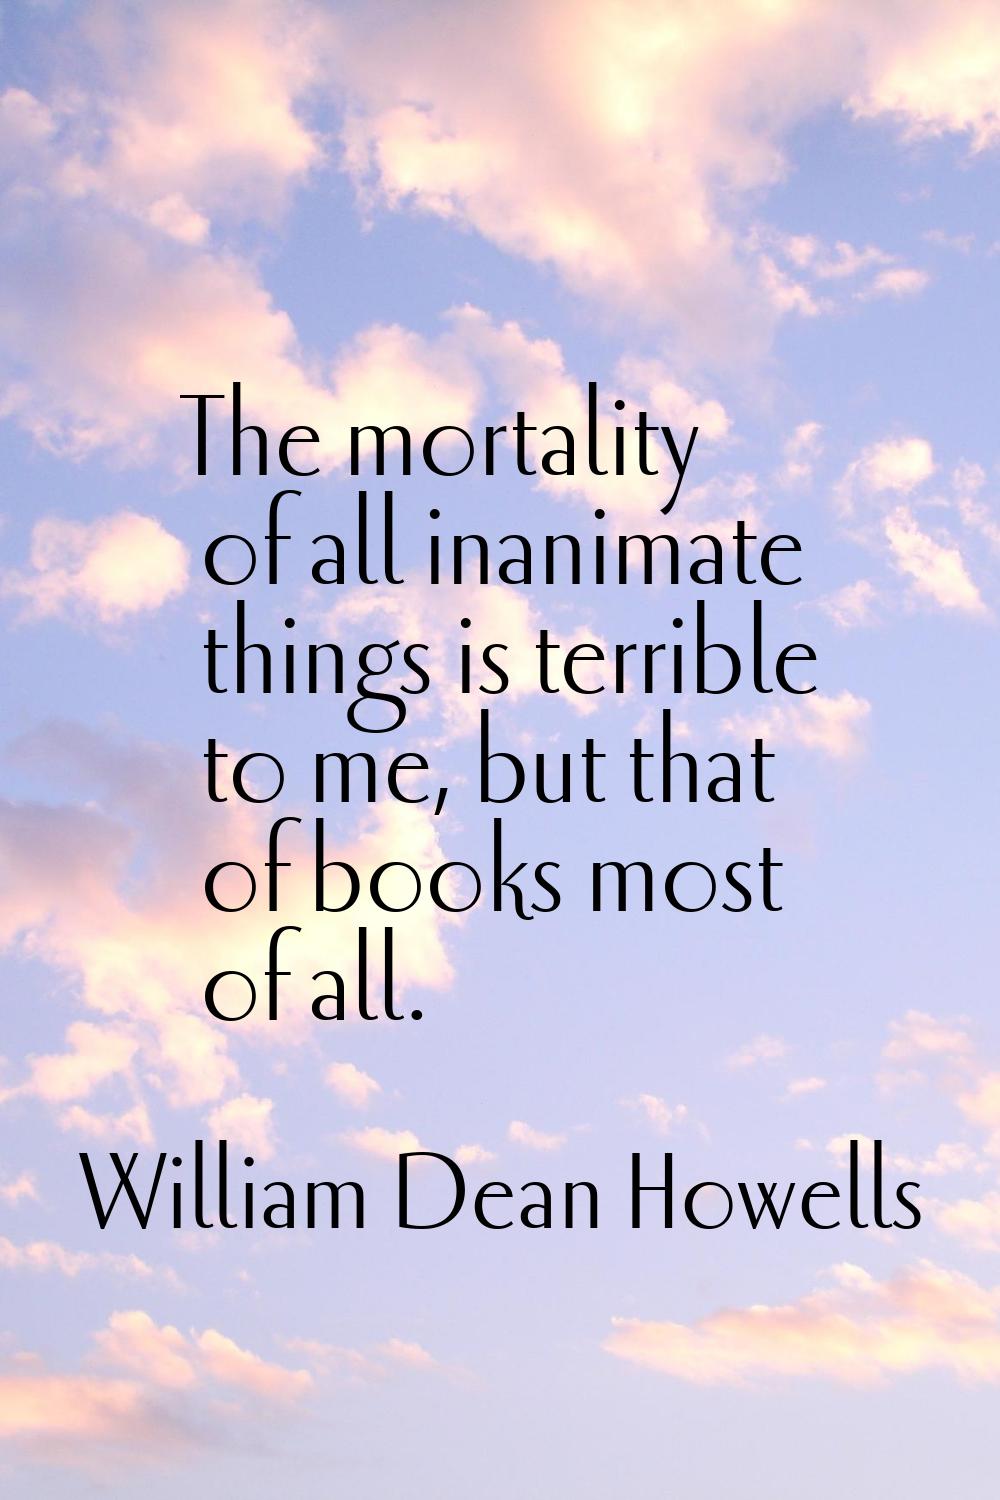 The mortality of all inanimate things is terrible to me, but that of books most of all.